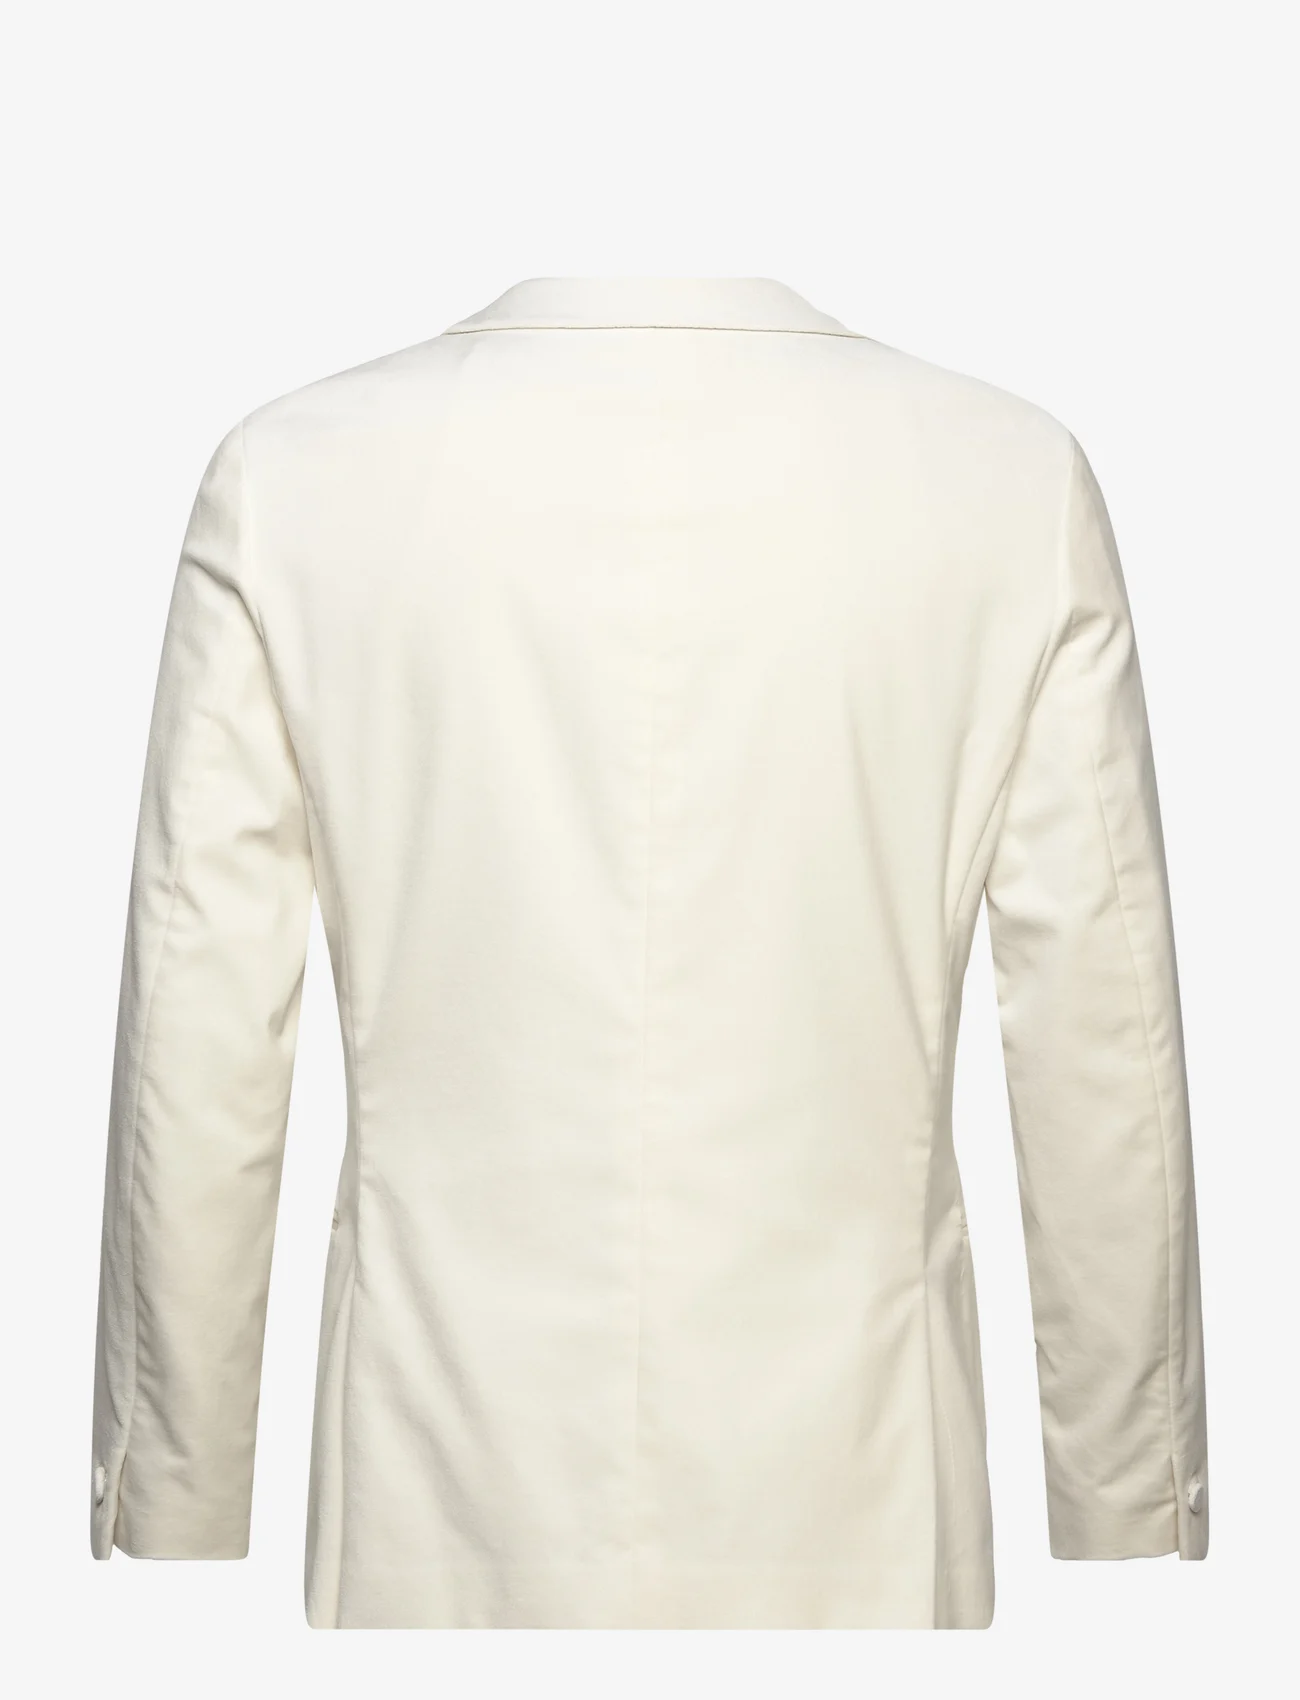 Reiss - APSARA - double breasted blazers - white - 1